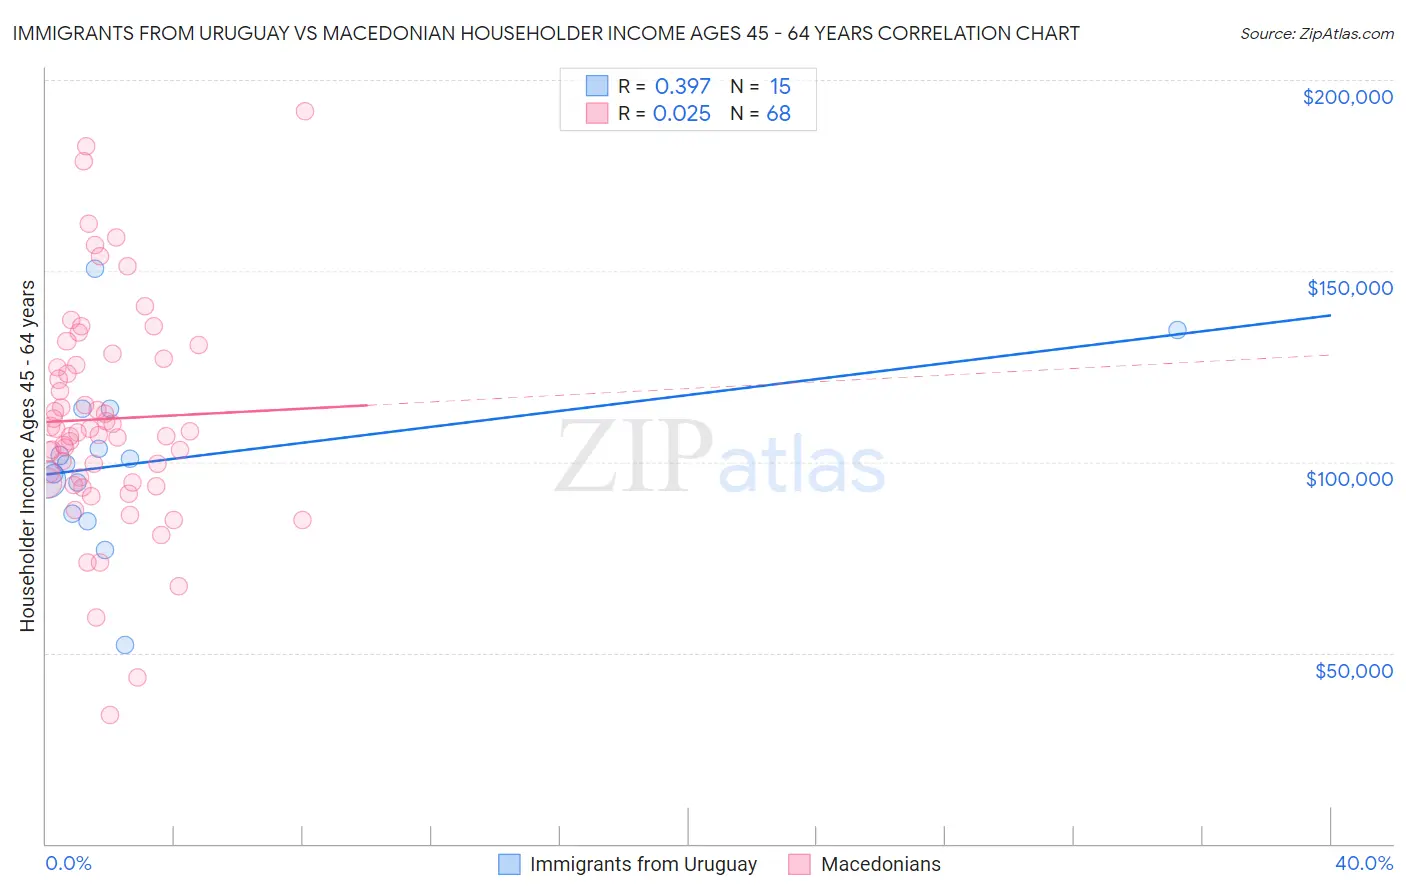 Immigrants from Uruguay vs Macedonian Householder Income Ages 45 - 64 years